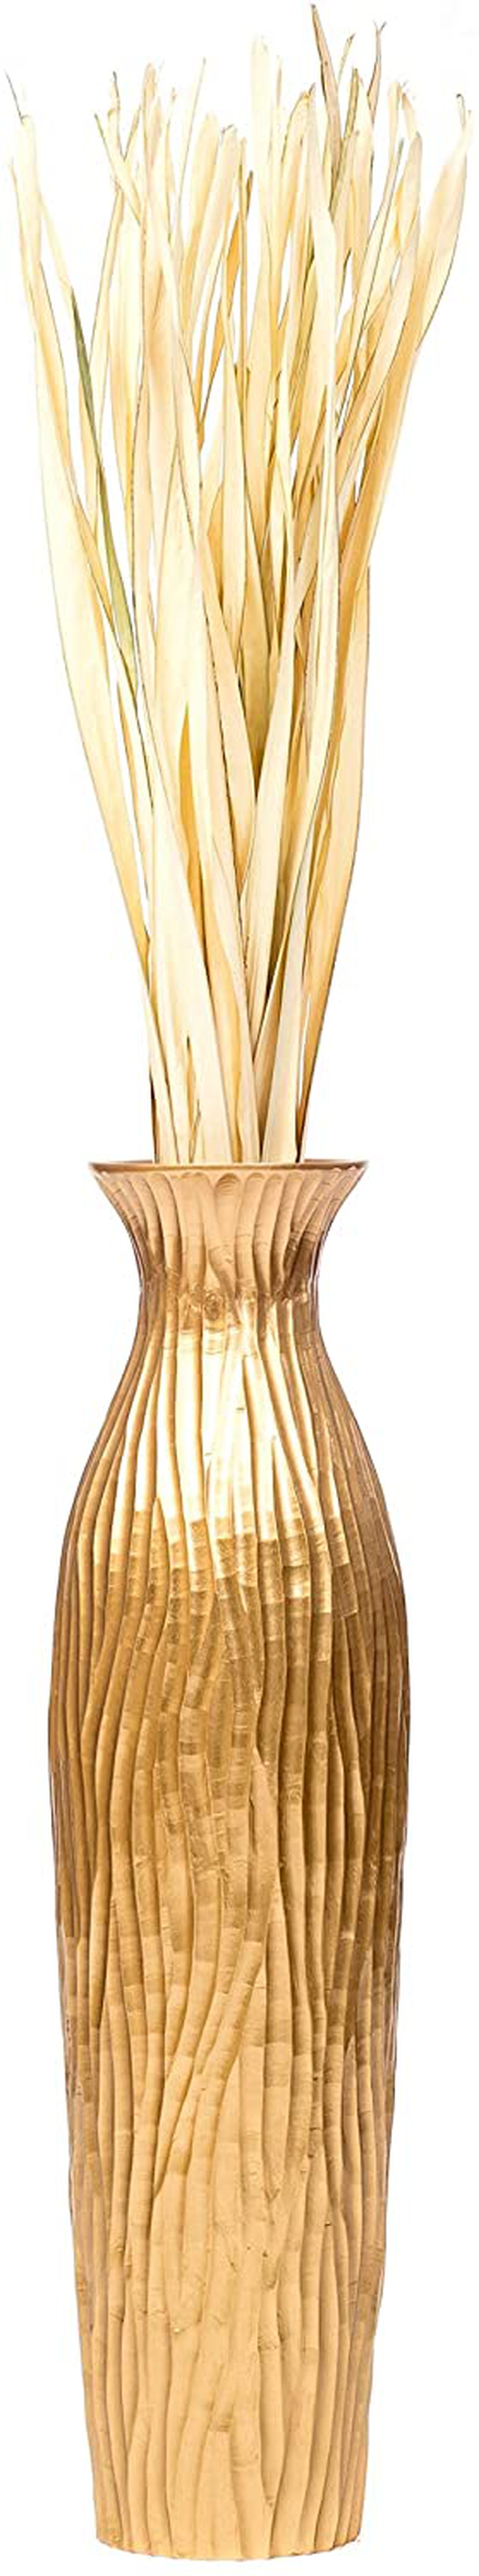 LEEWADEE Large Floor Vase – Handmade Flower Holder Made of Wood, Sophisticated Vessel for Decorative Branches and Dried Flowers, 30 inches, Golden Home & Garden > Decor > Vases LEEWADEE   